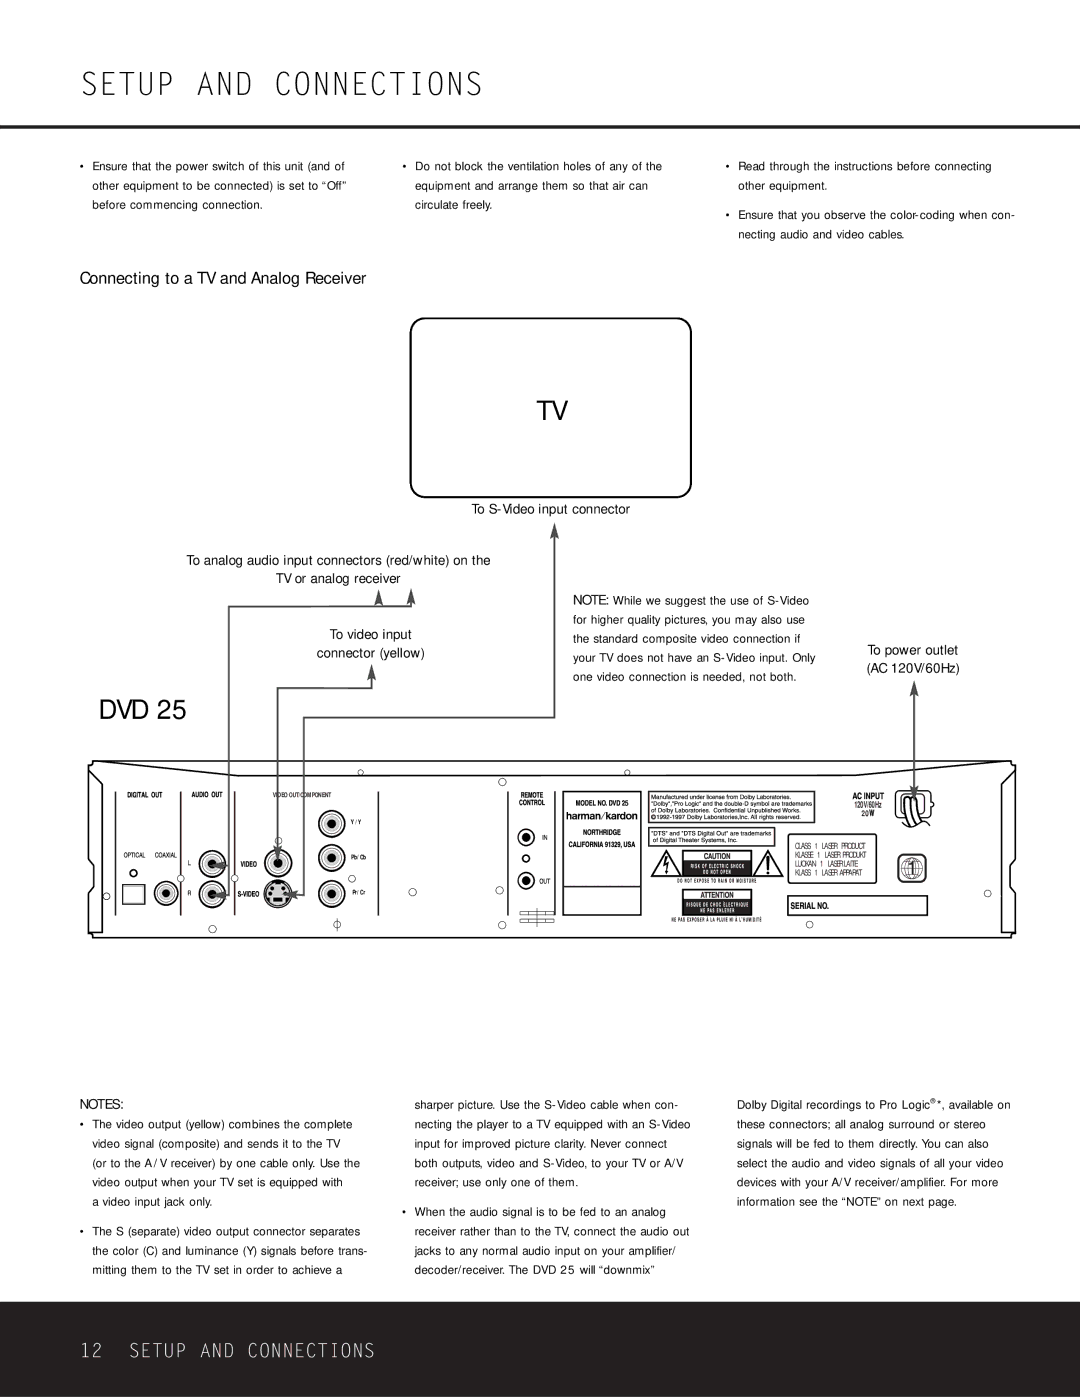 Harman-Kardon DVD 25 owner manual Setup and Connections, Connecting to a TV and Analog Receiver, To S-Video input connector 